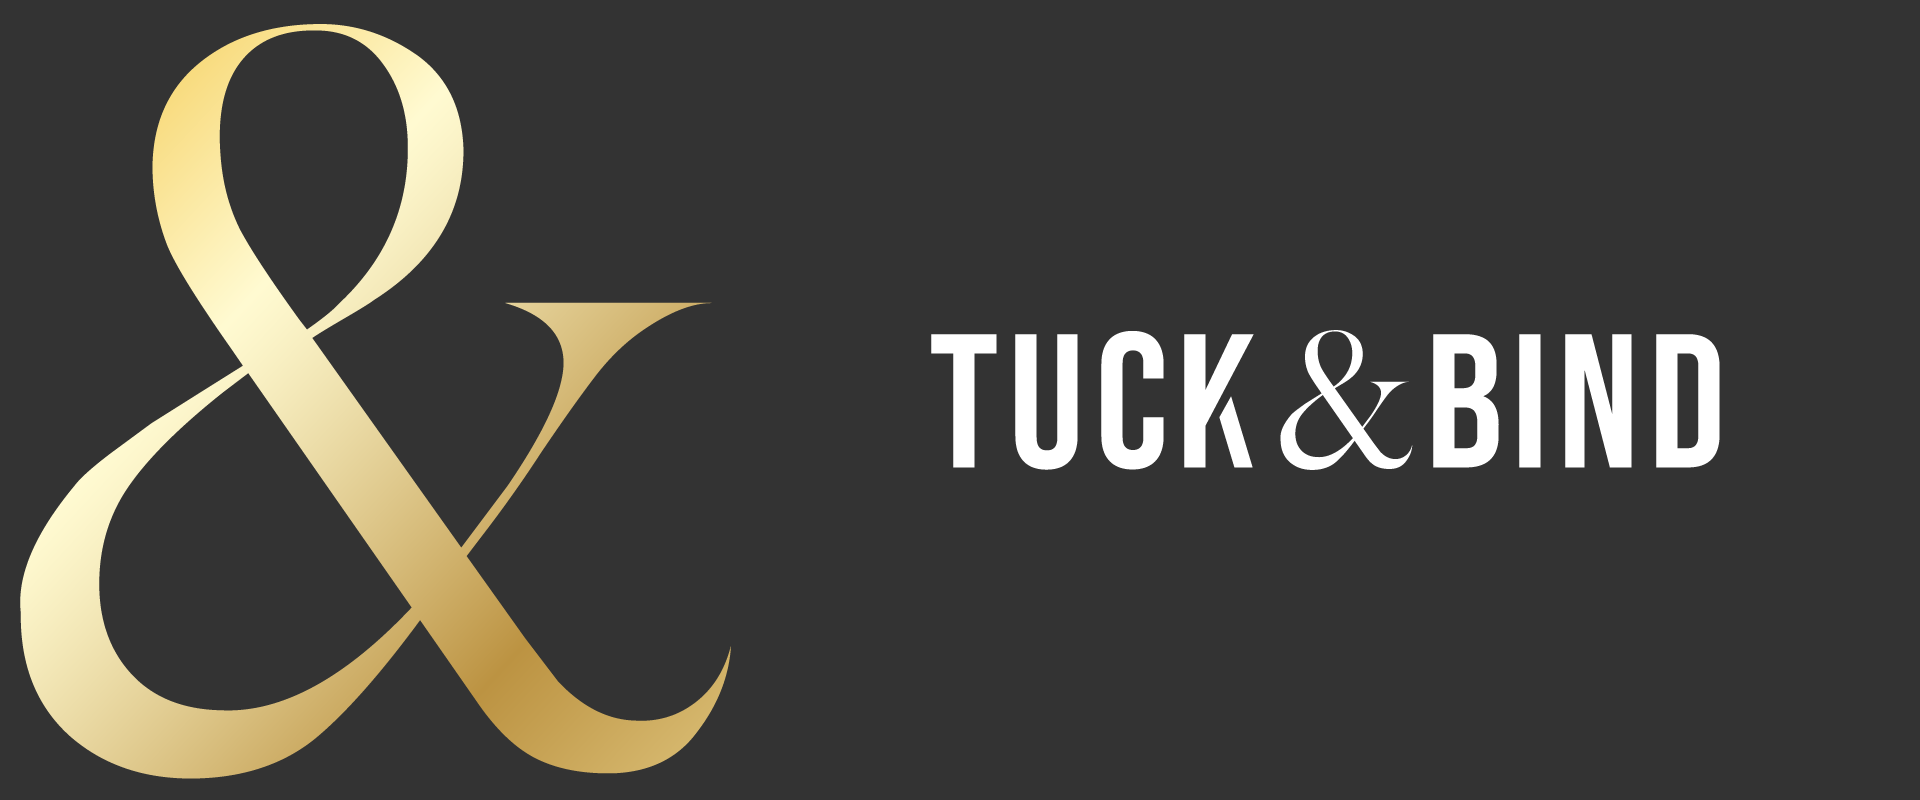 Tuck and bind logo banner